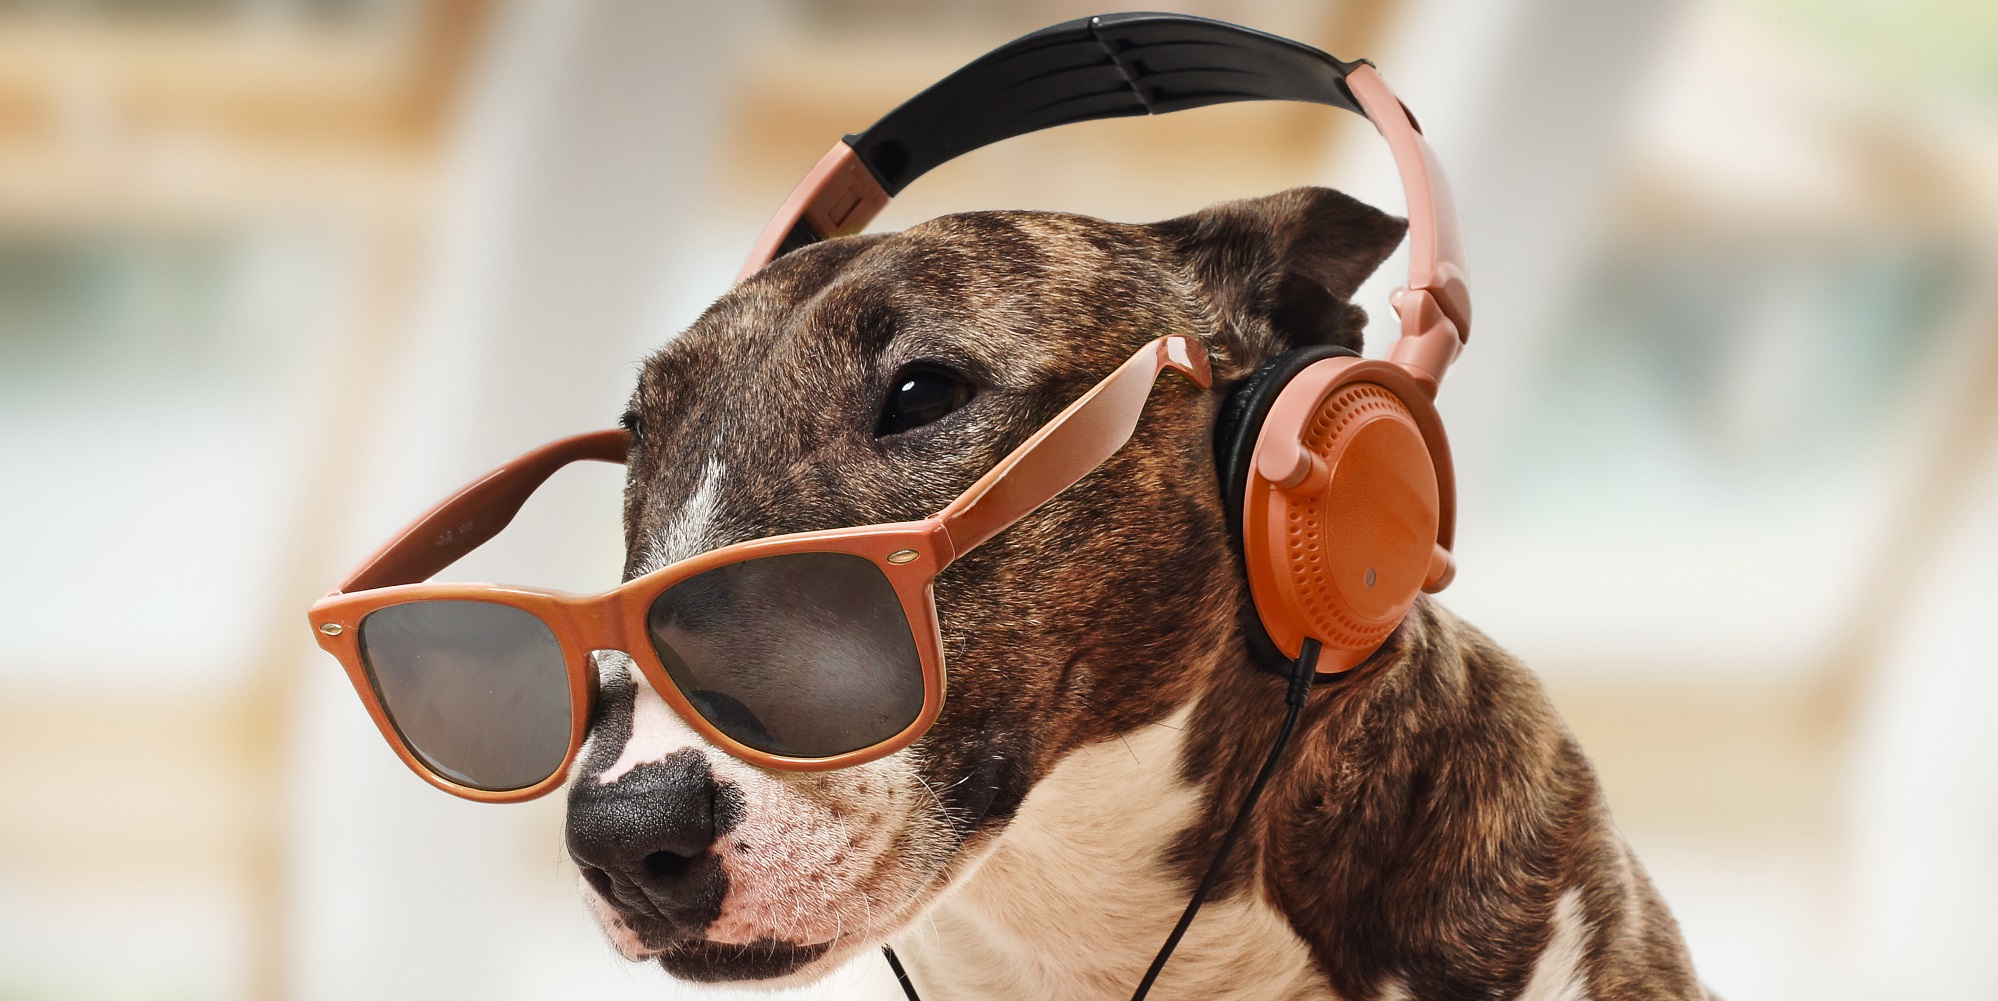 Miniature Bull Terrier is listening to music